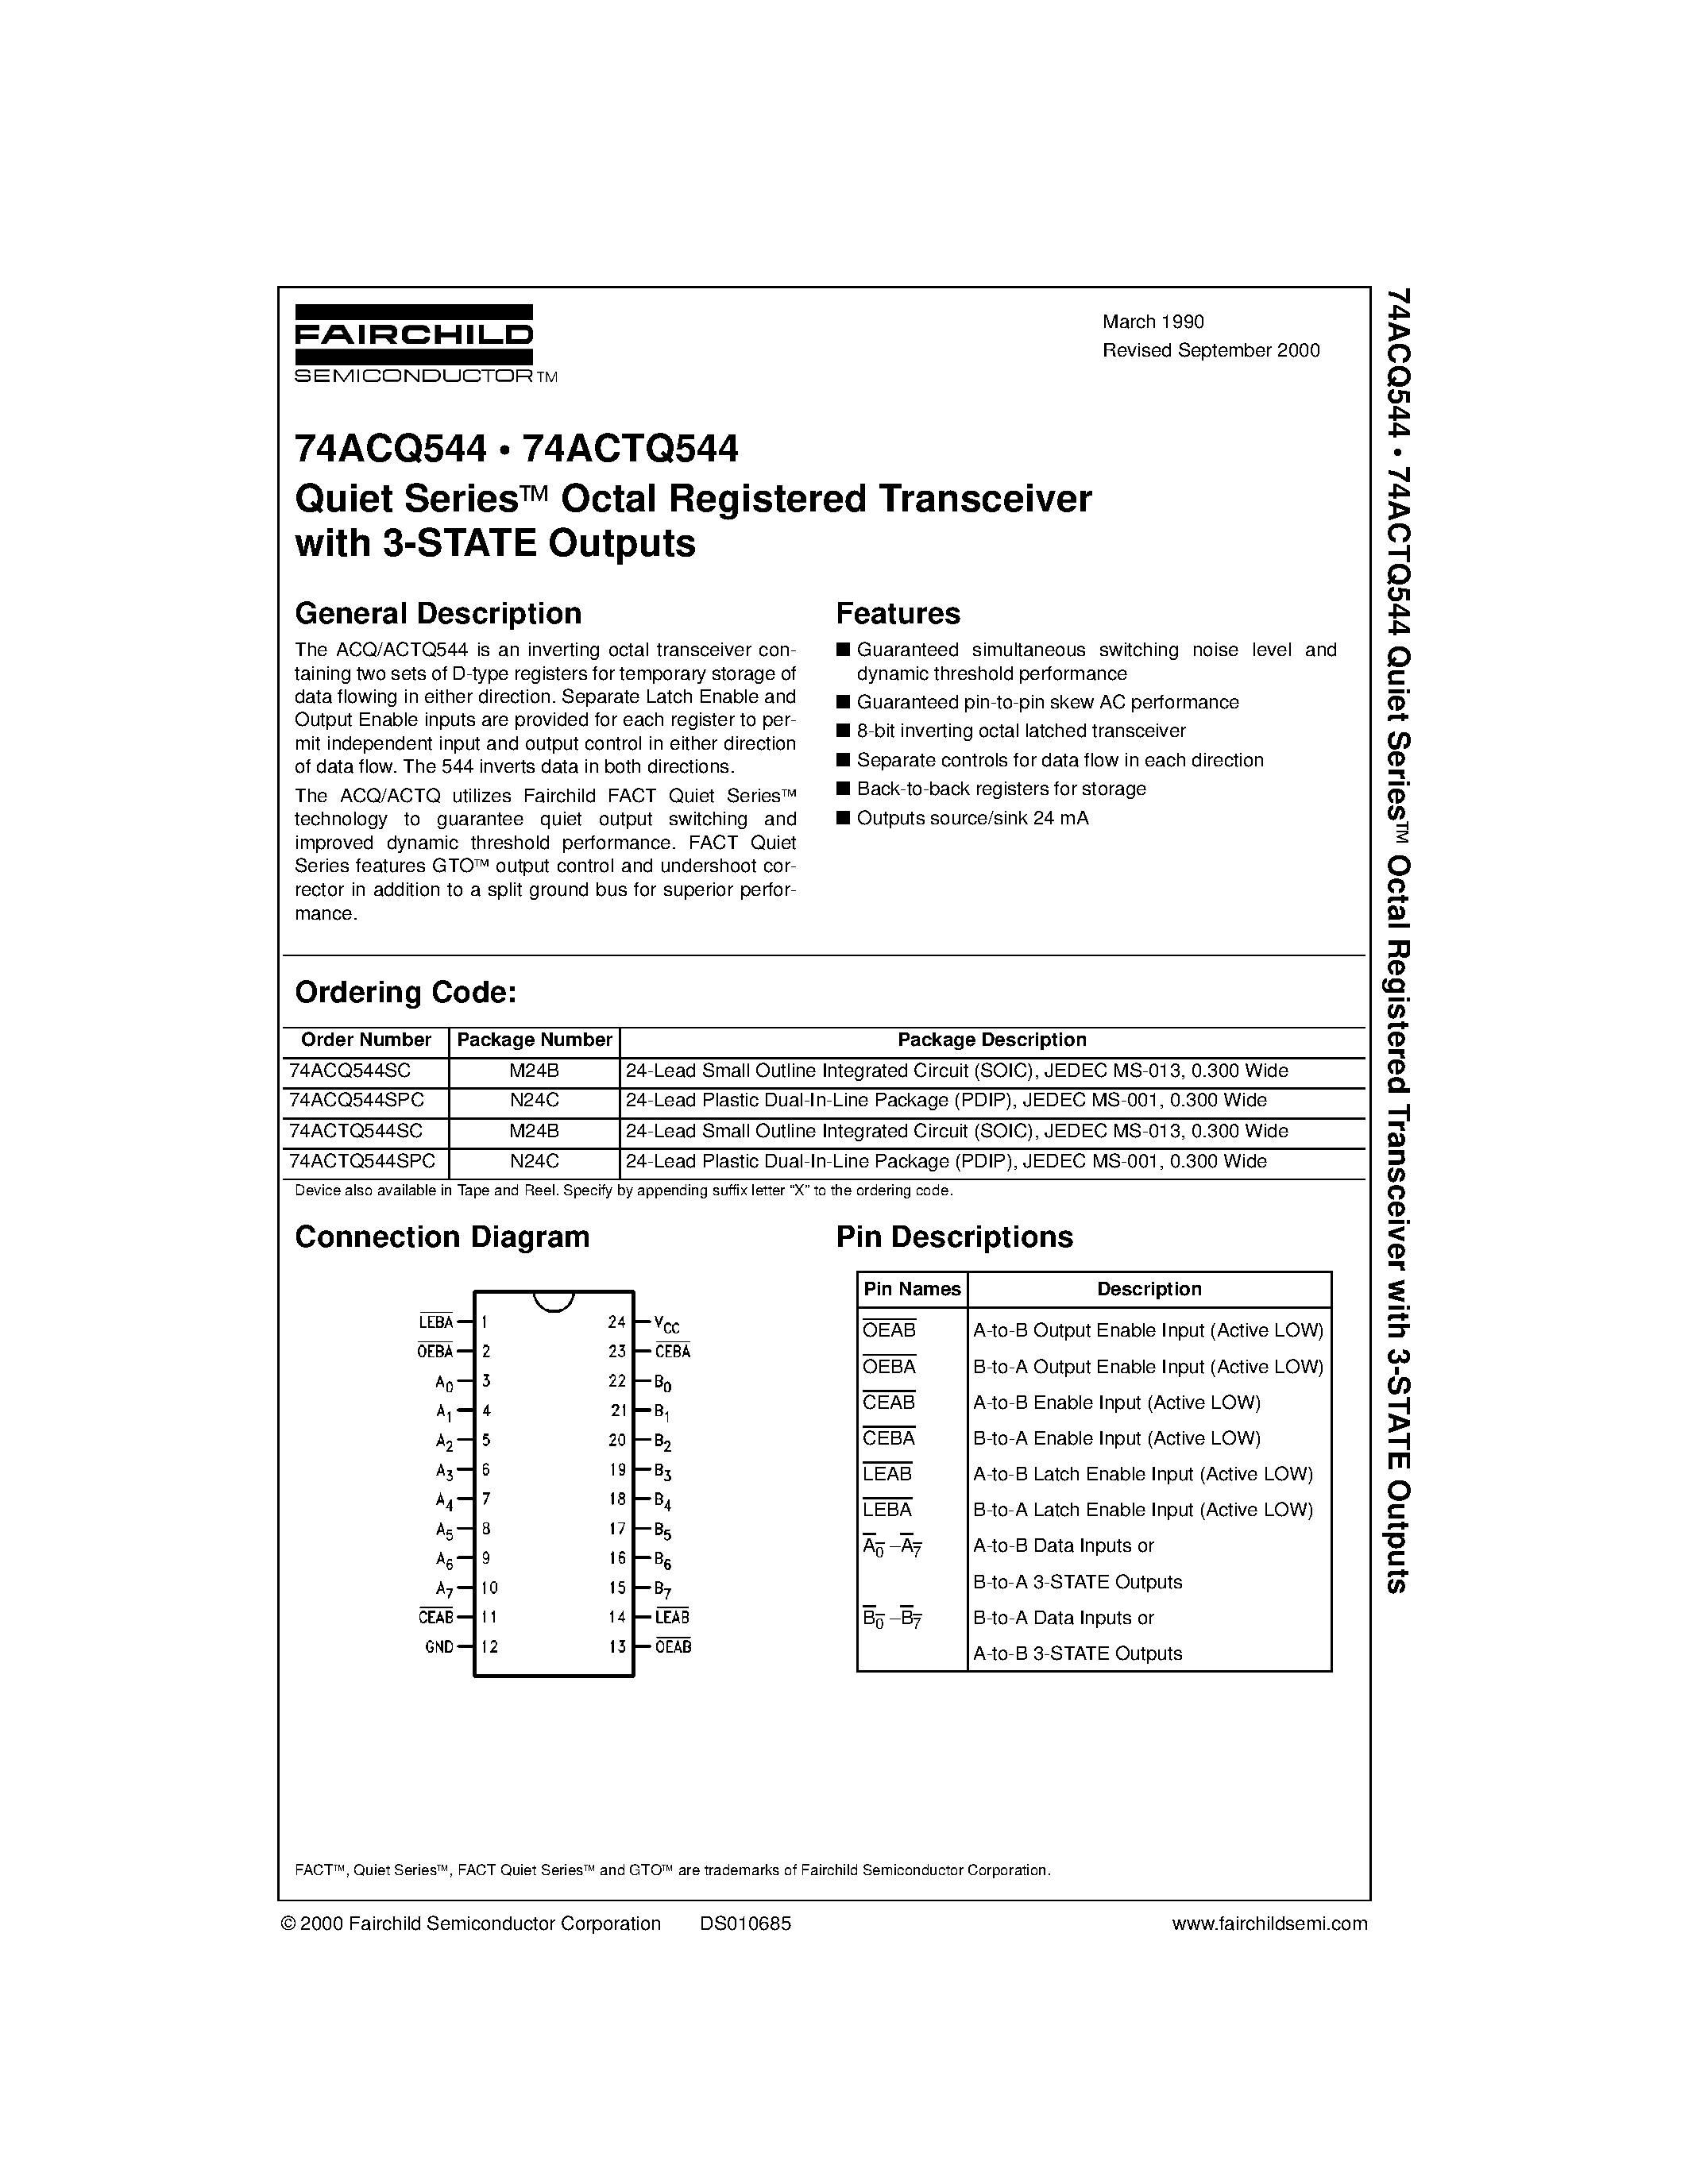 Datasheet 74ACTQ544 - Quiet Series Octal Registered Transceiver with 3-STATE Outputs page 1